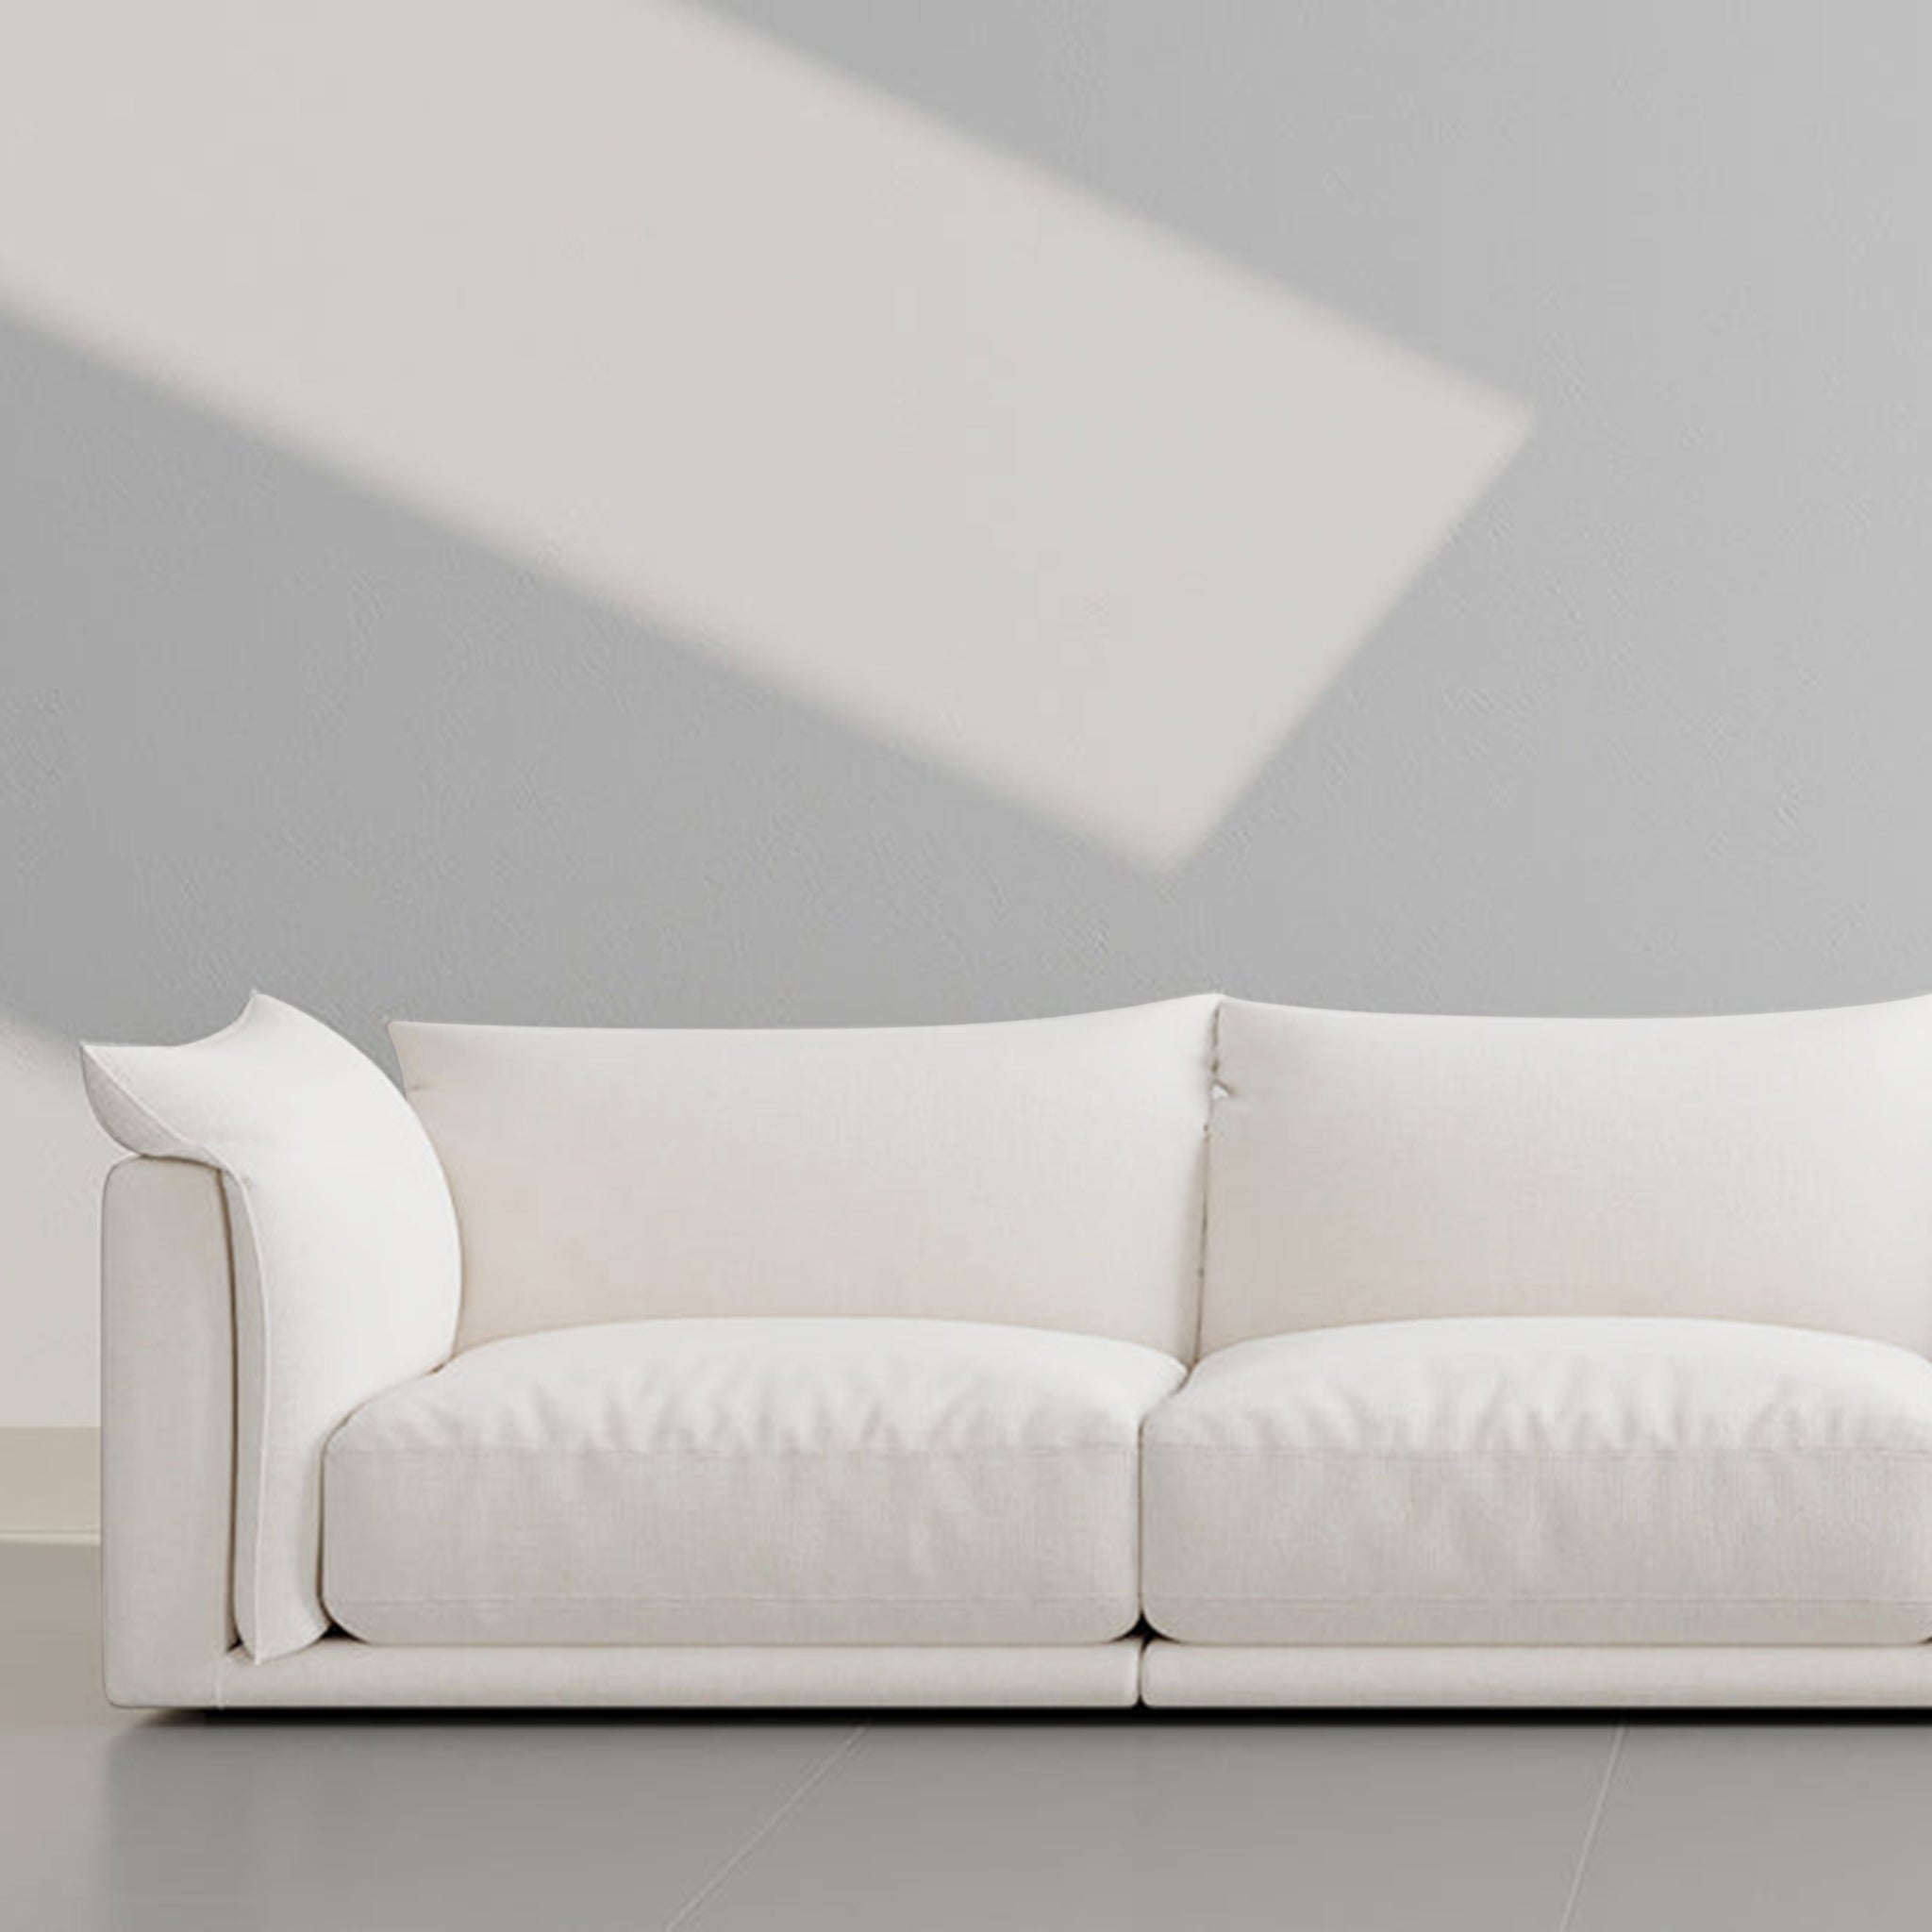 Modern white sofa with plush cushions against a minimalist gray wall, bathed in natural light.